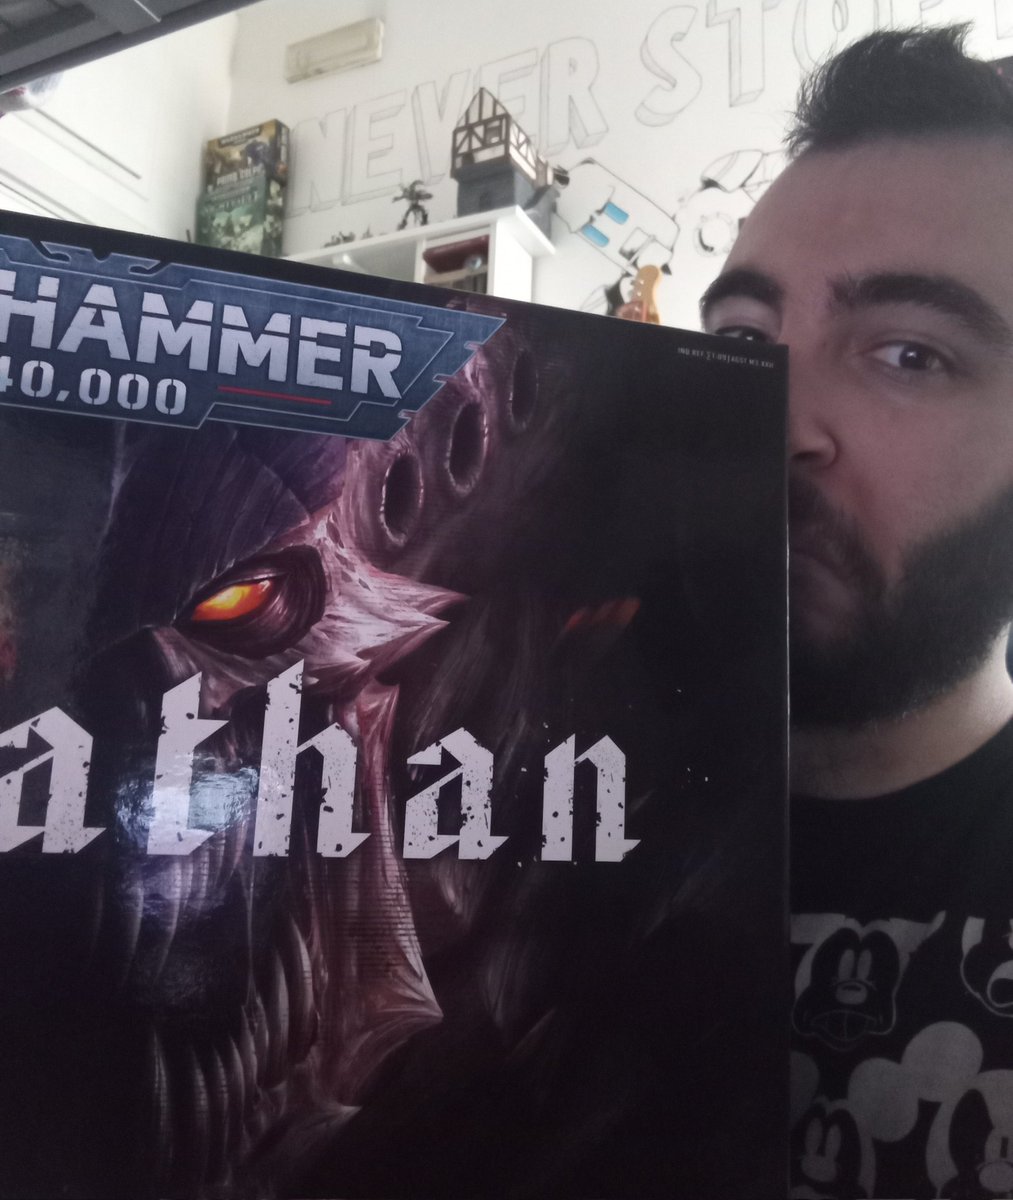 #New40k 's Leviathan box is so big that you get only the 'athan' in this pic, sorry

#warhammercommunity